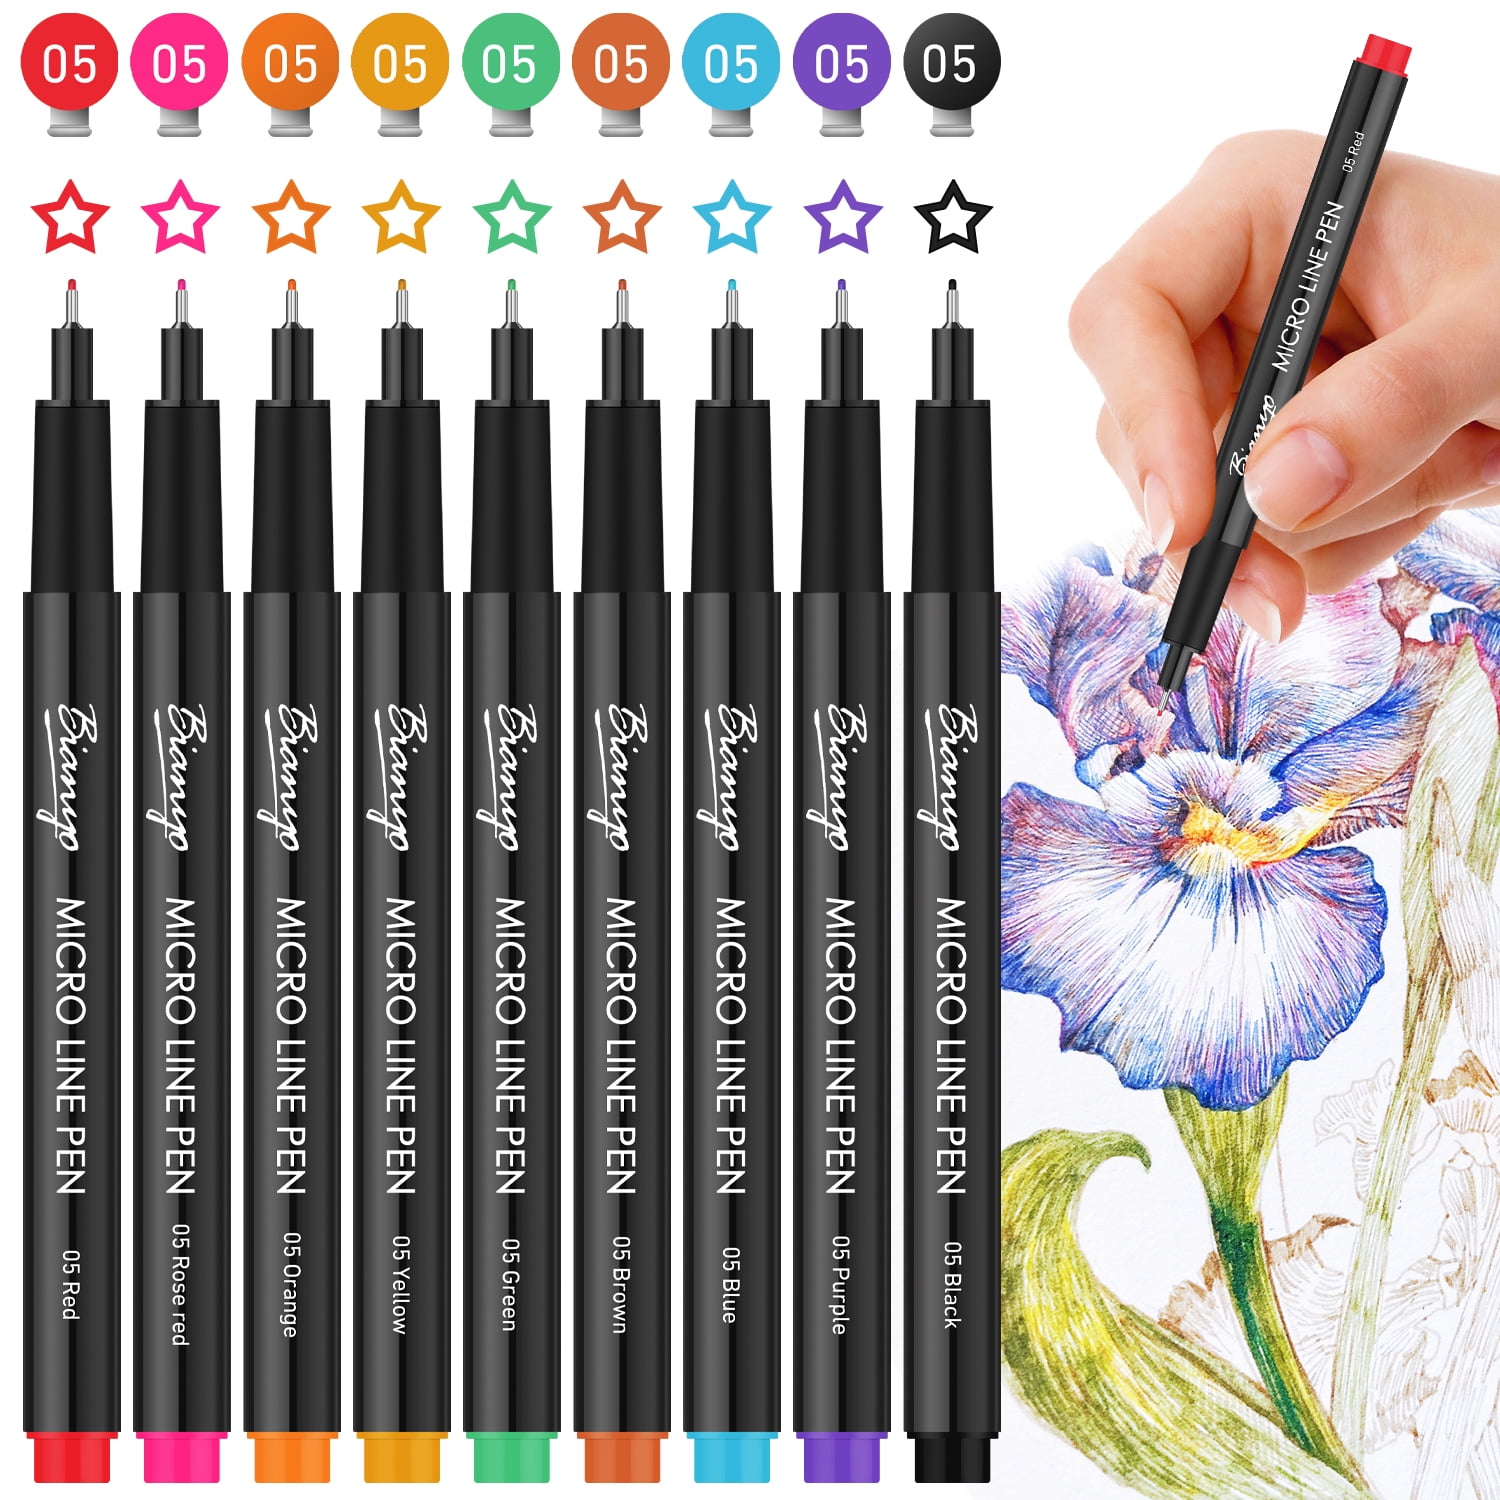 Bianyo 18-Pieces Pigment Ink Drawing pens, 2 Packs, Each Pack of 9 with  Zipper Pouch, Water-Resistant Fineliner Pens for Drawing, Sketching